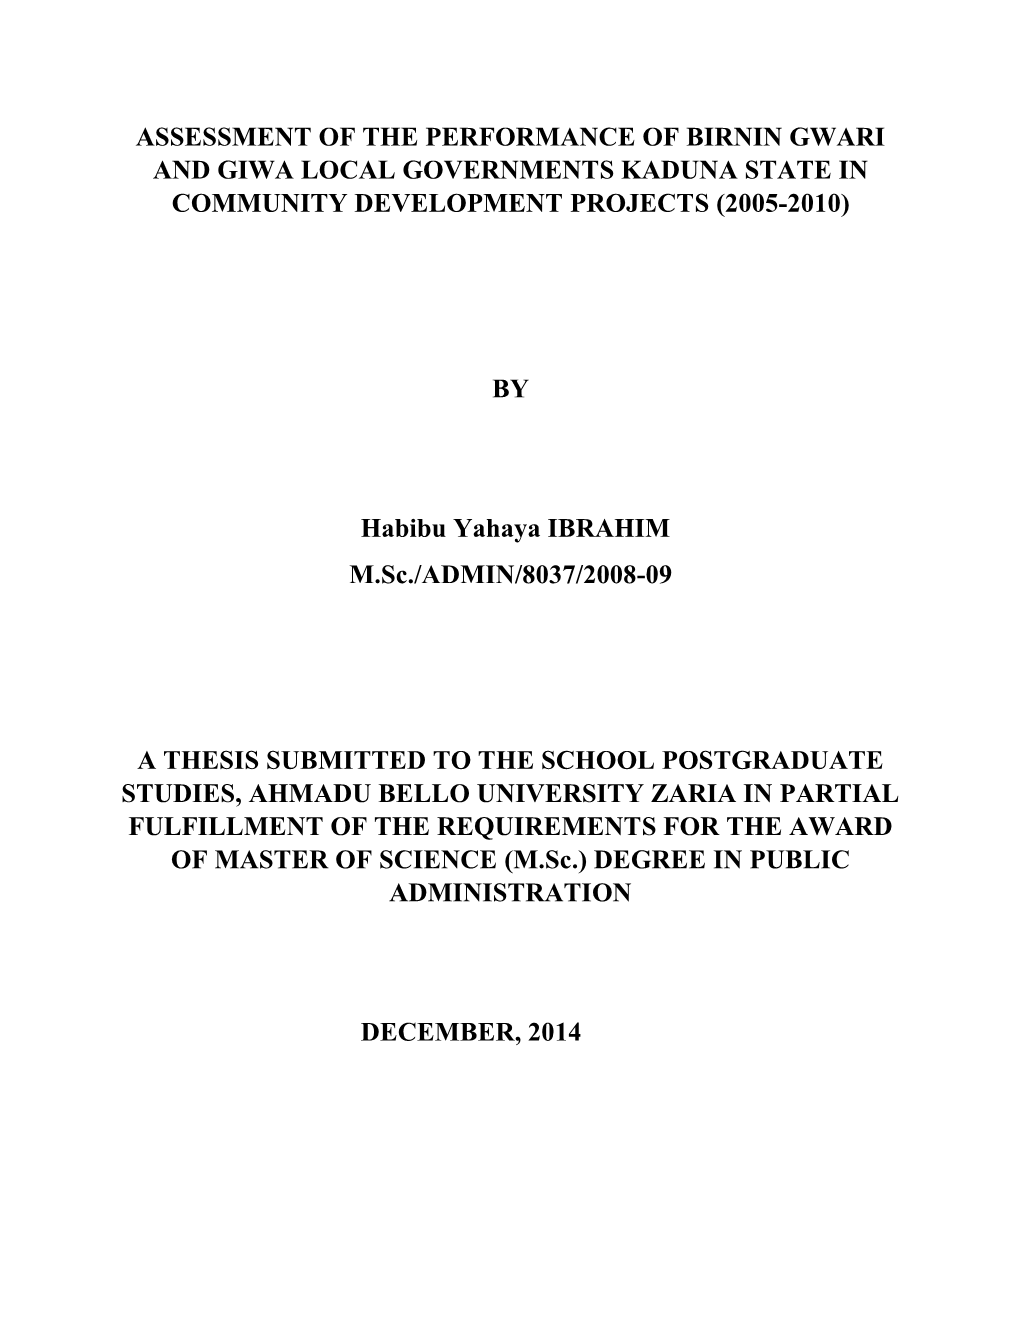 Assessment of the Performance of Birnin Gwari and Giwa Local Governments Kaduna State in Community Development Projects (2005-2010)